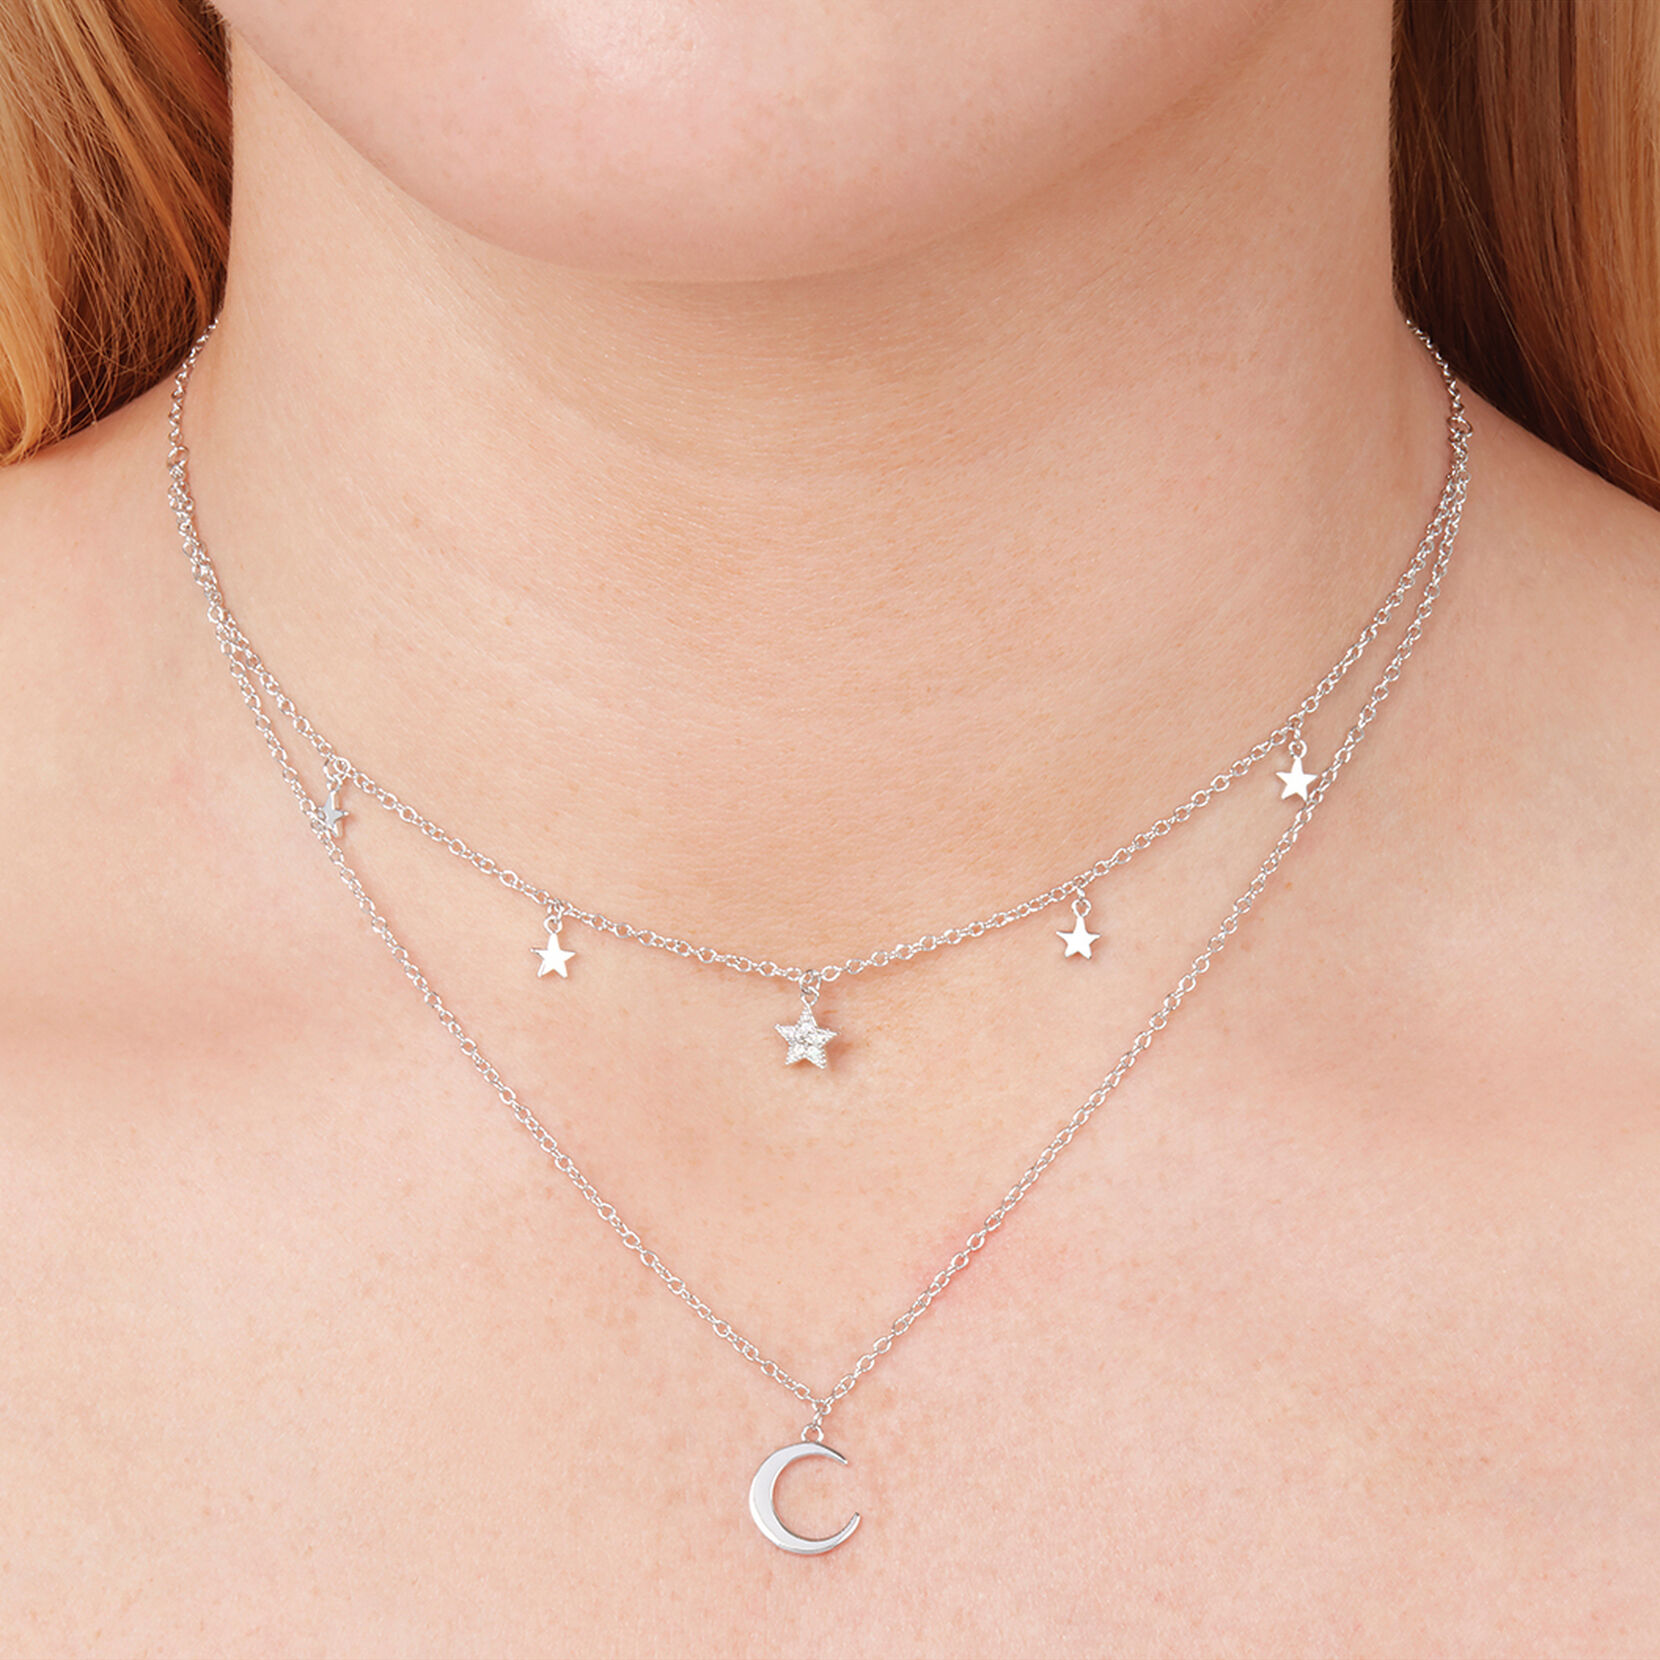 Celestial Double Crescent Moon and Star Necklace Silver